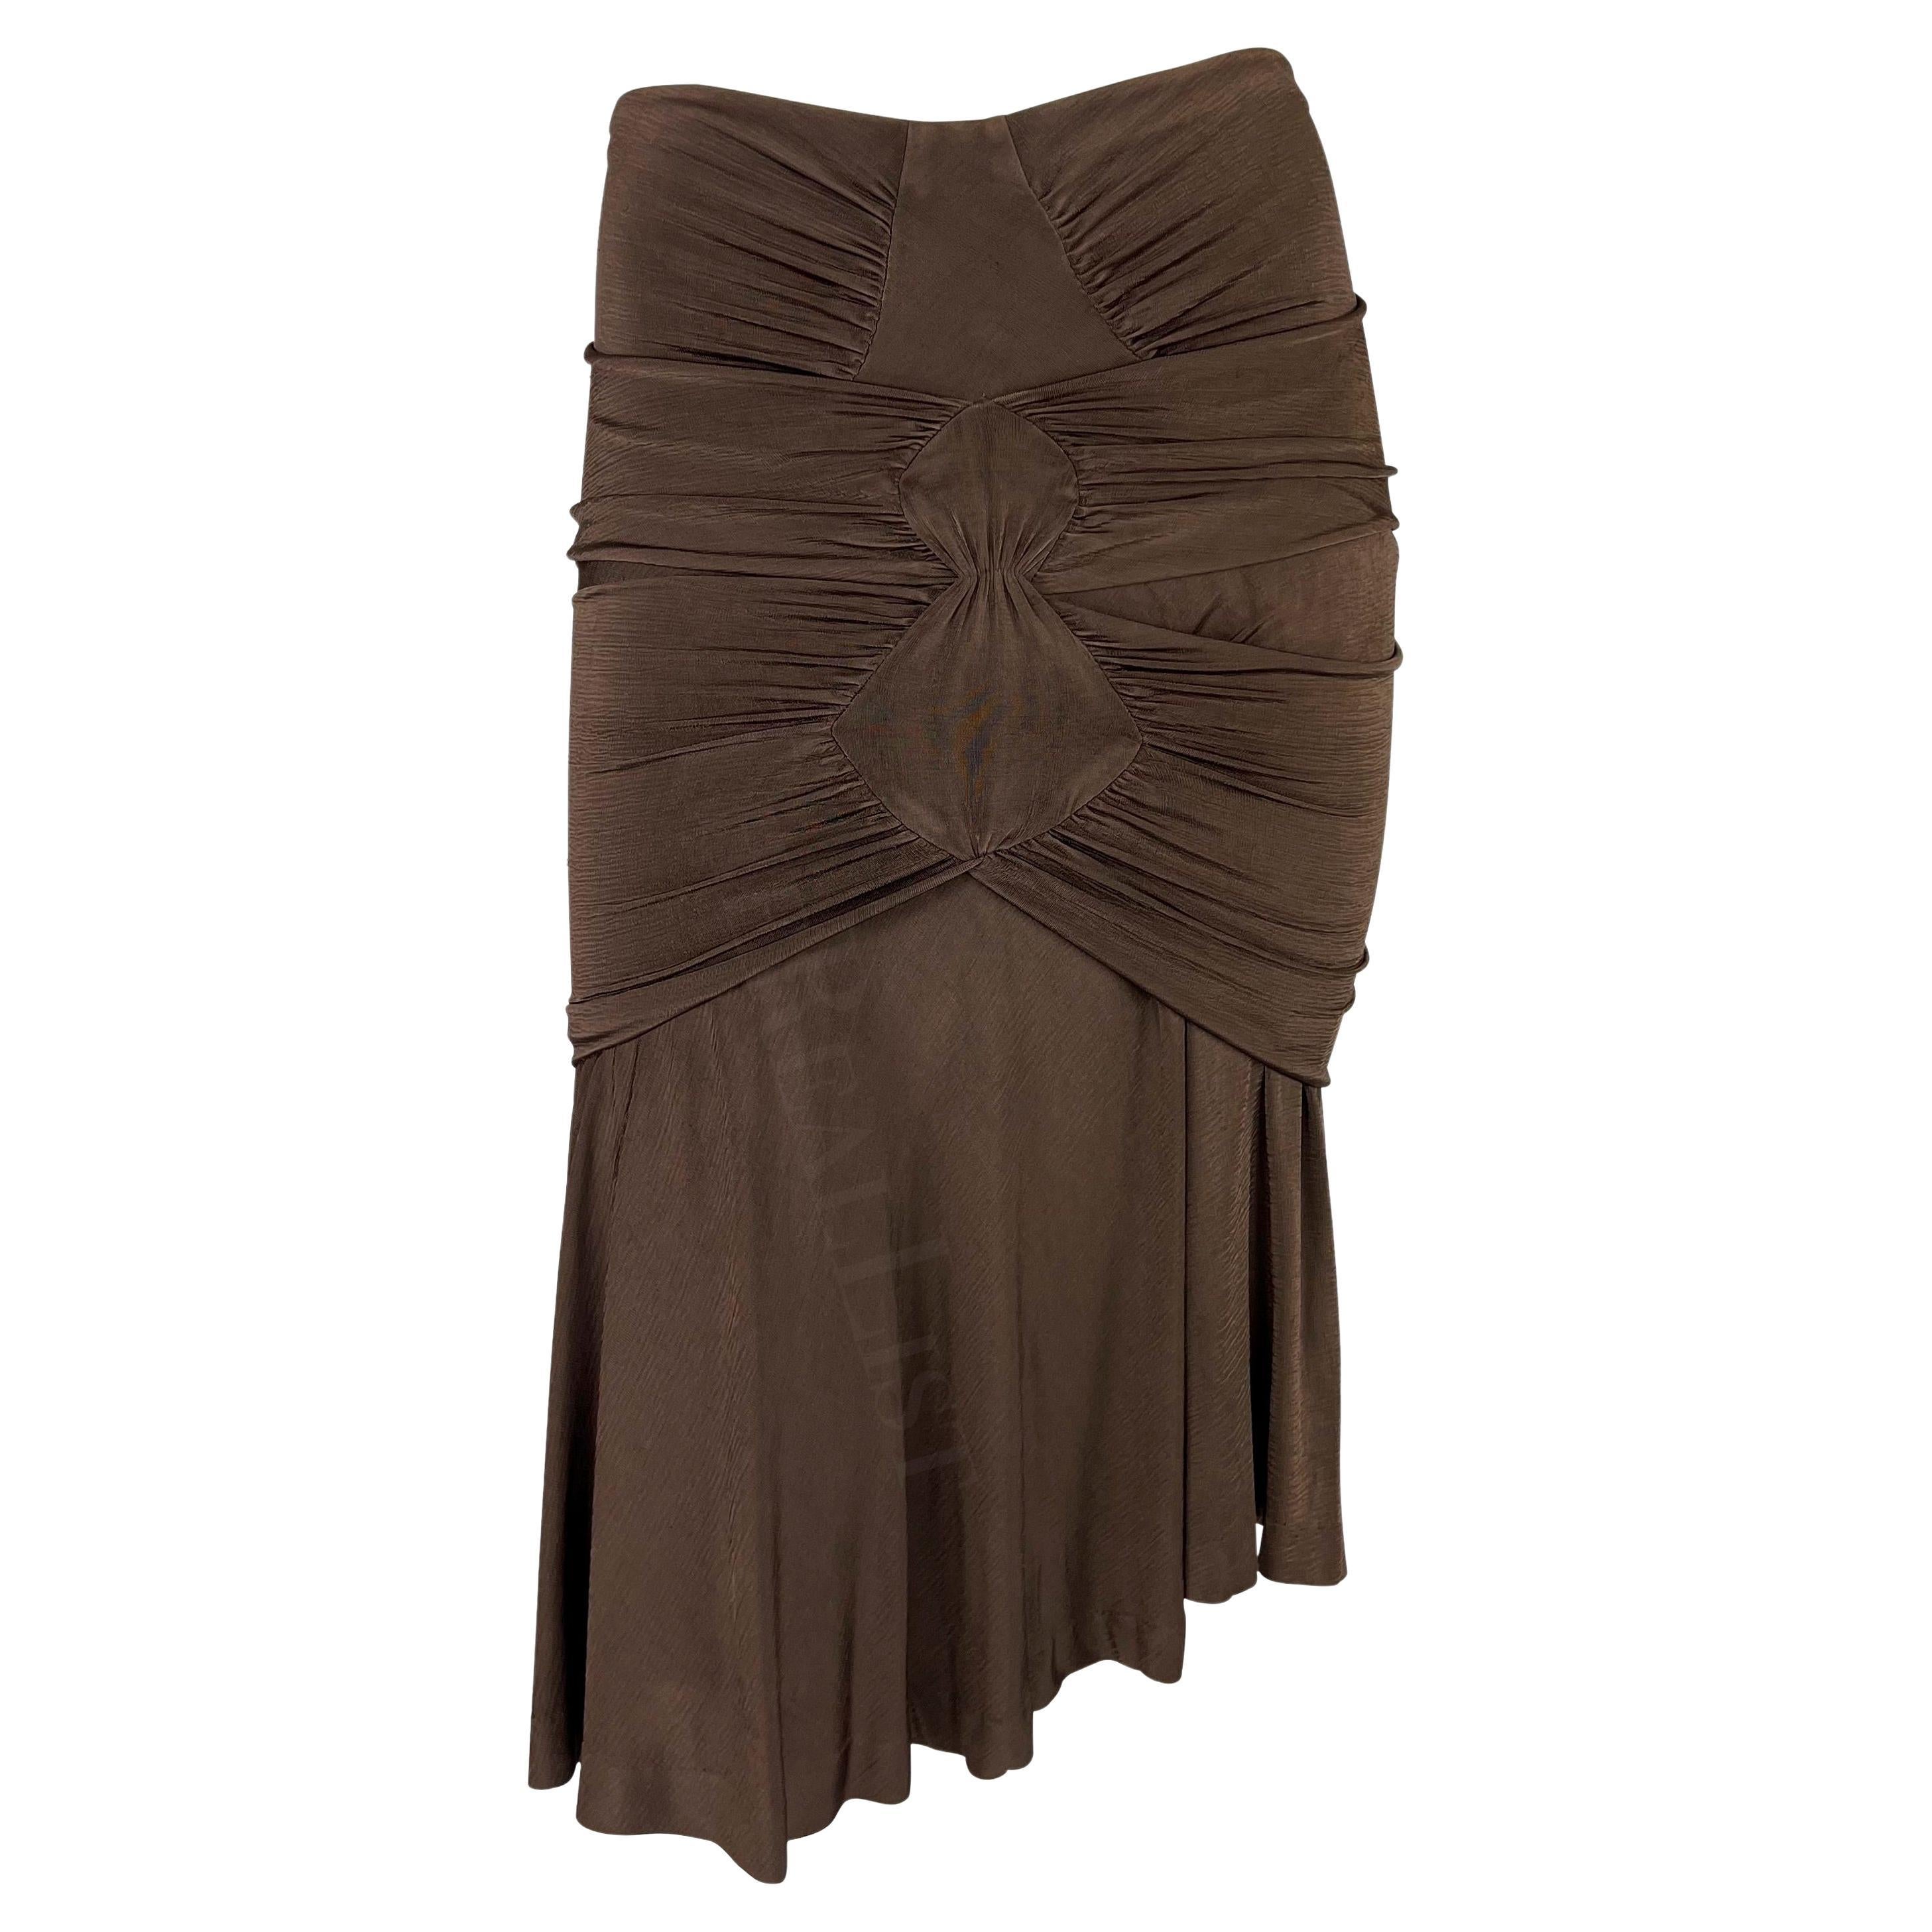 S/S 2003 Yves Saint Laurent by Tom Ford Runway Brown Ruched Slinky Skirt For Sale